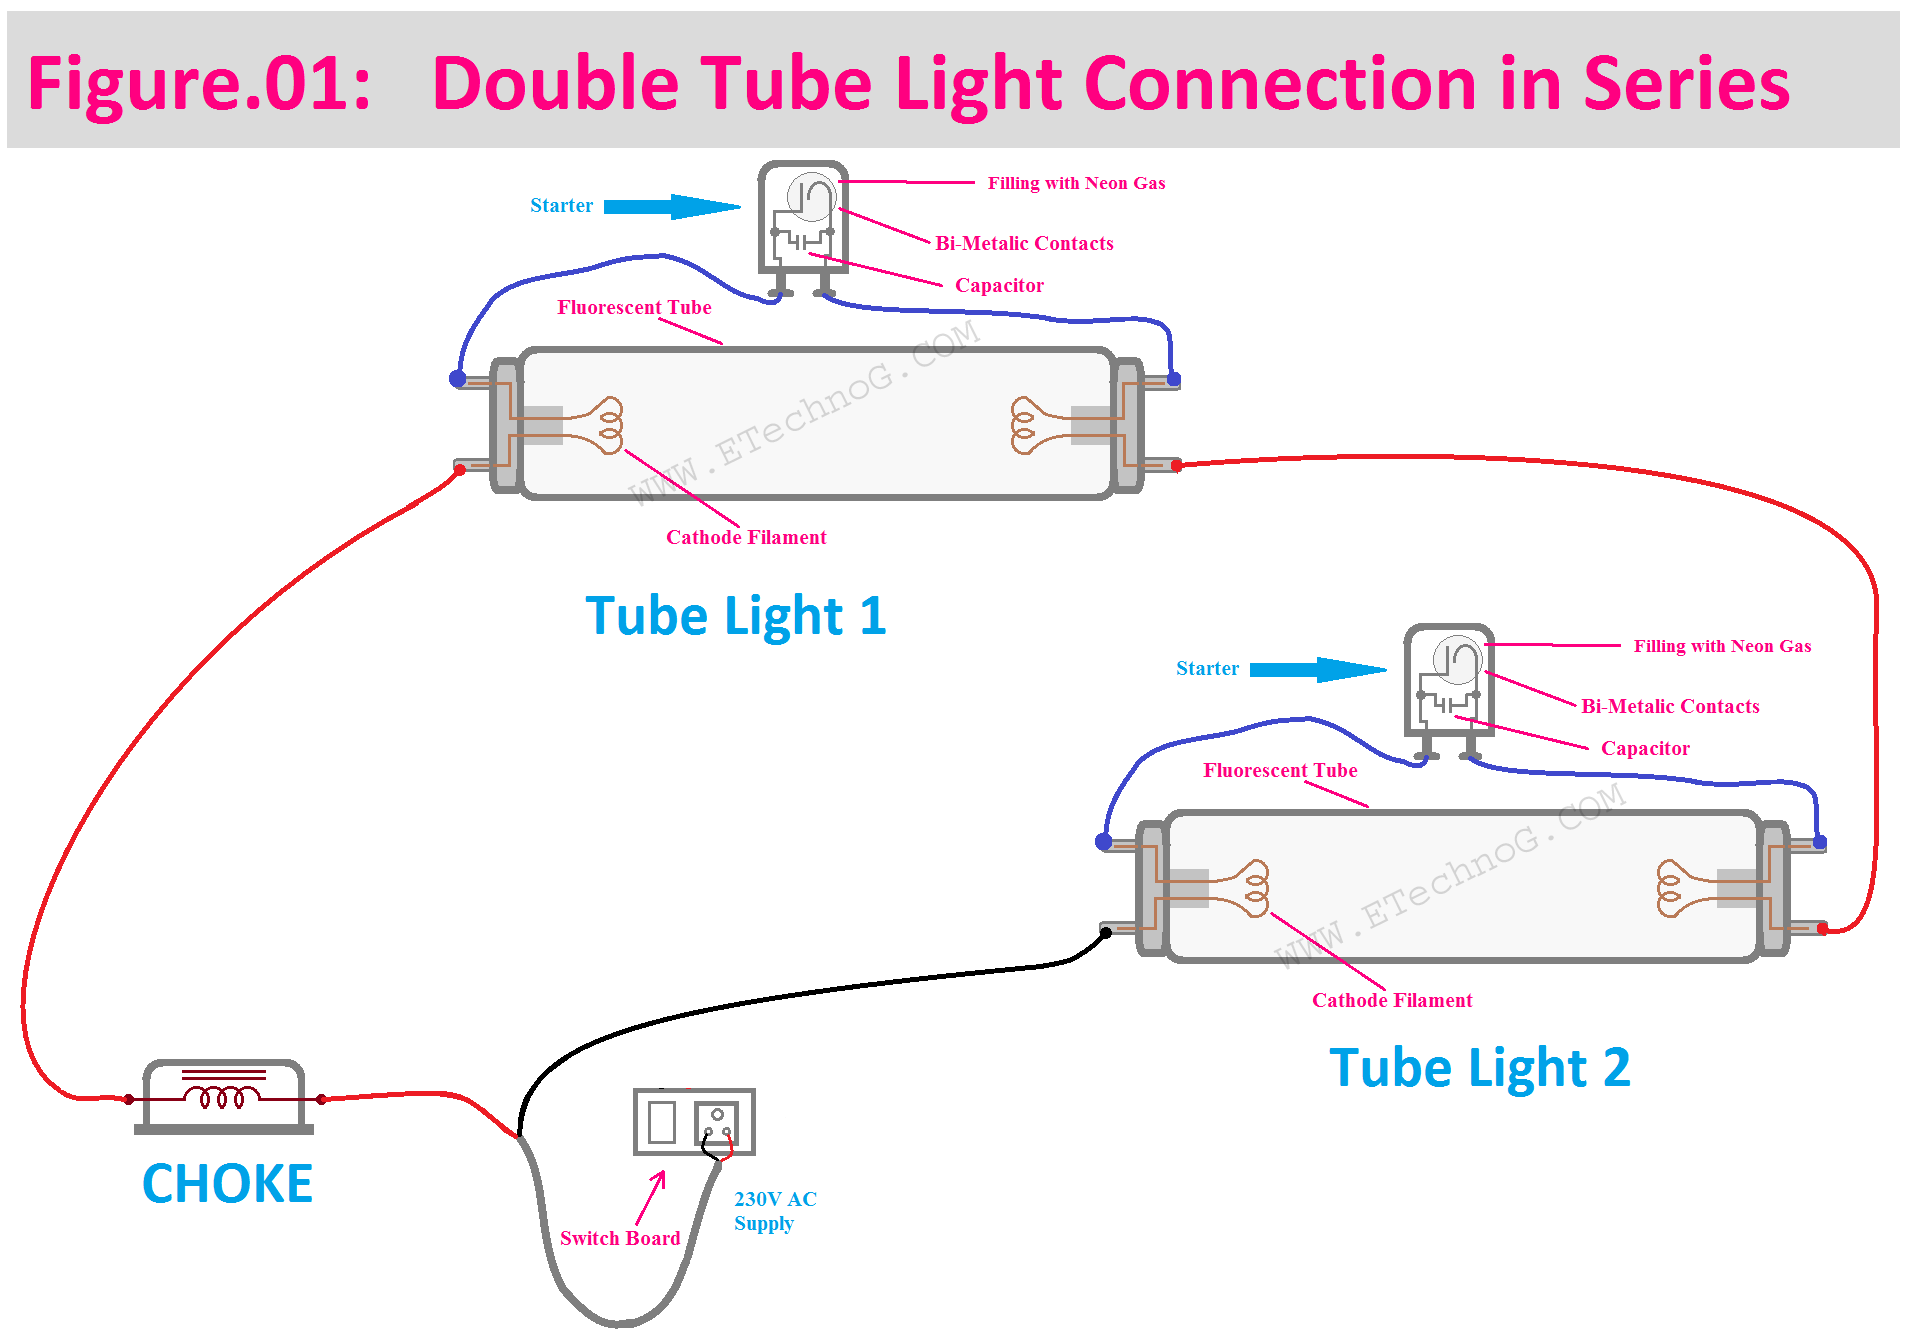 Double Tube Light Connection Diagram in Series